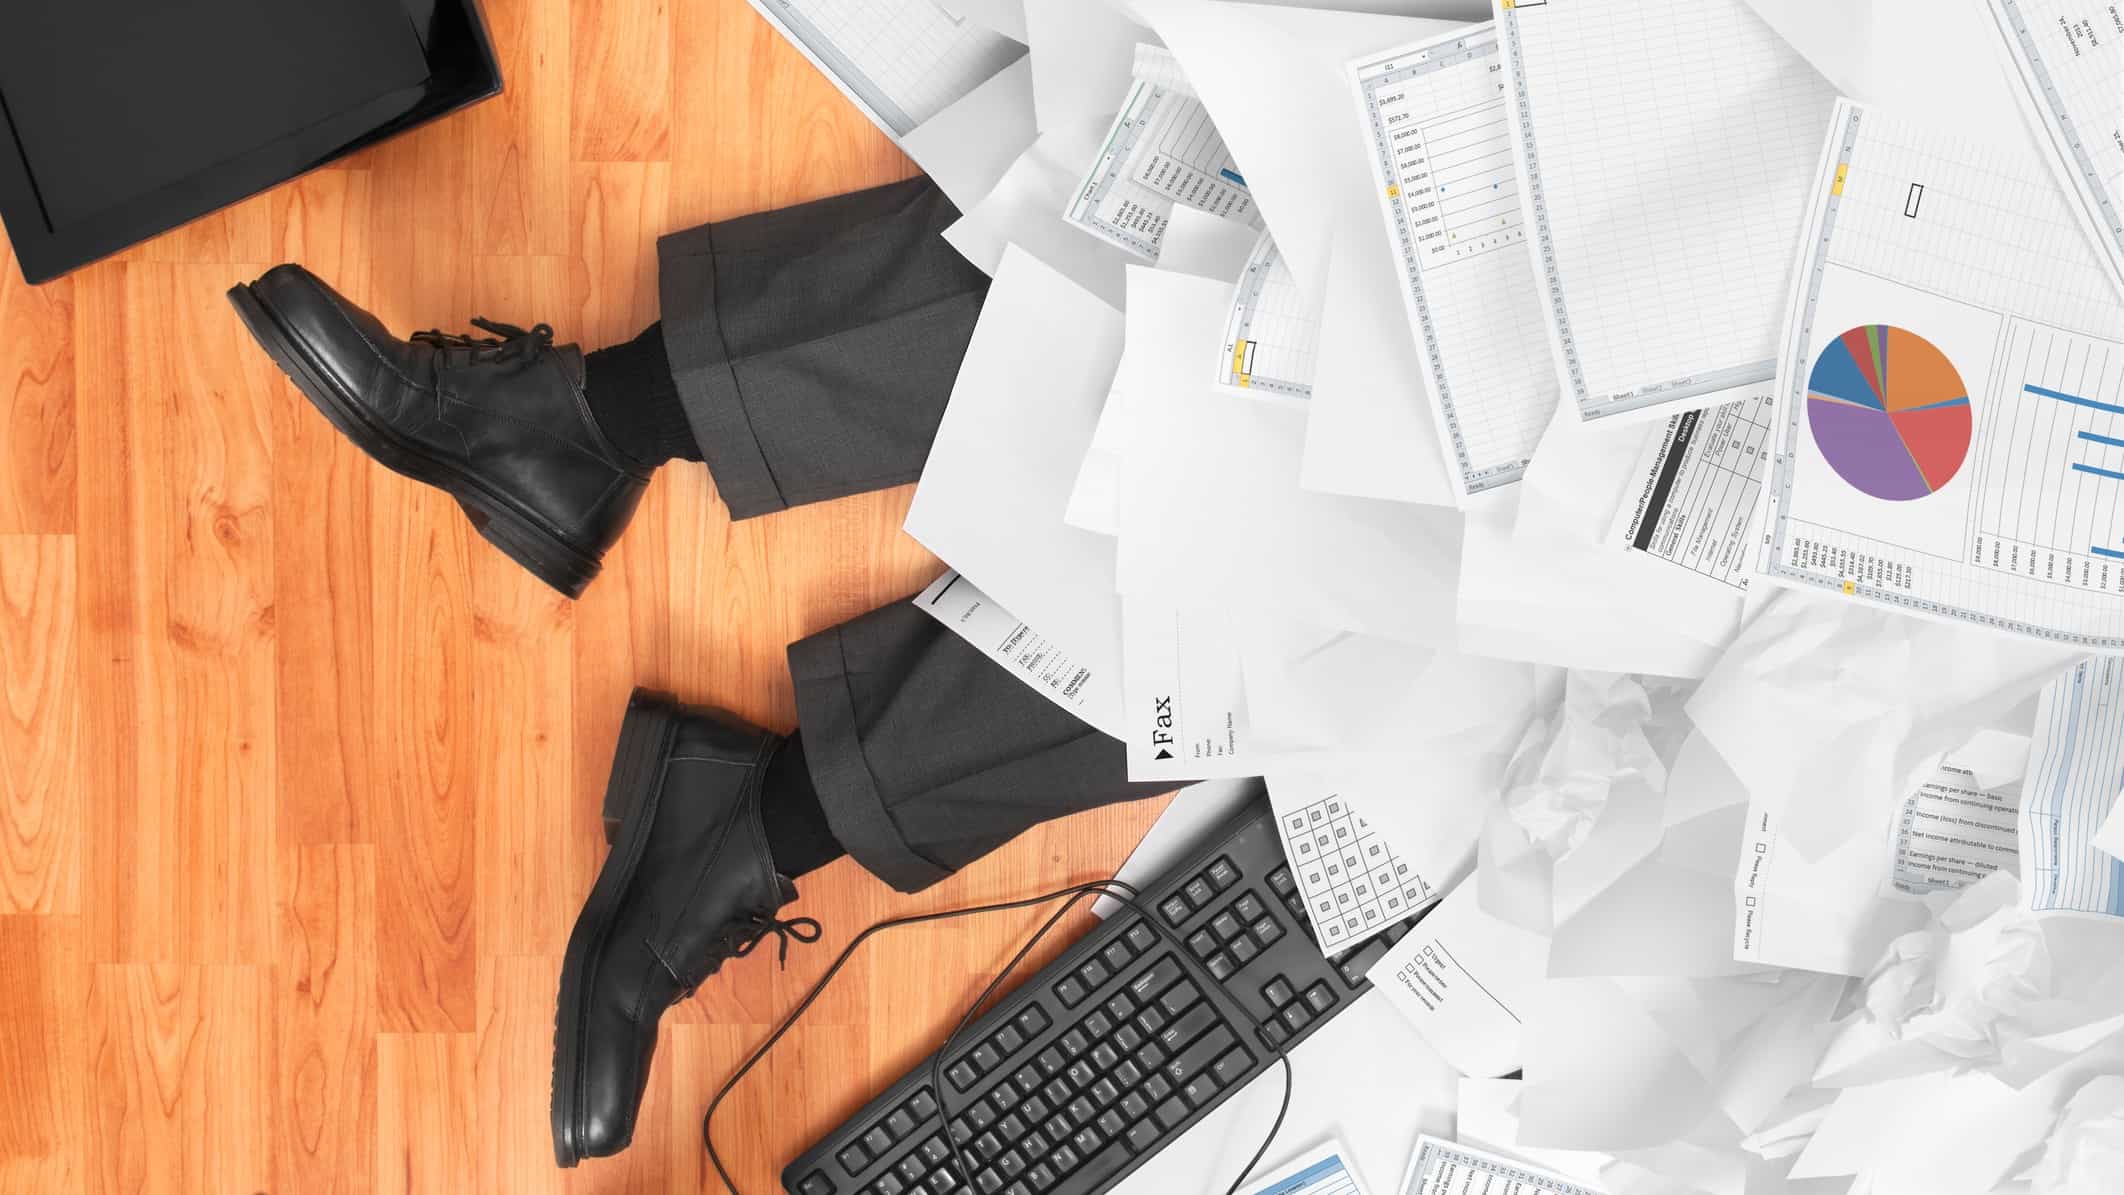 A pair of legs can bee seen on the floor buried under a pile of paperwork, indicating a high volume day